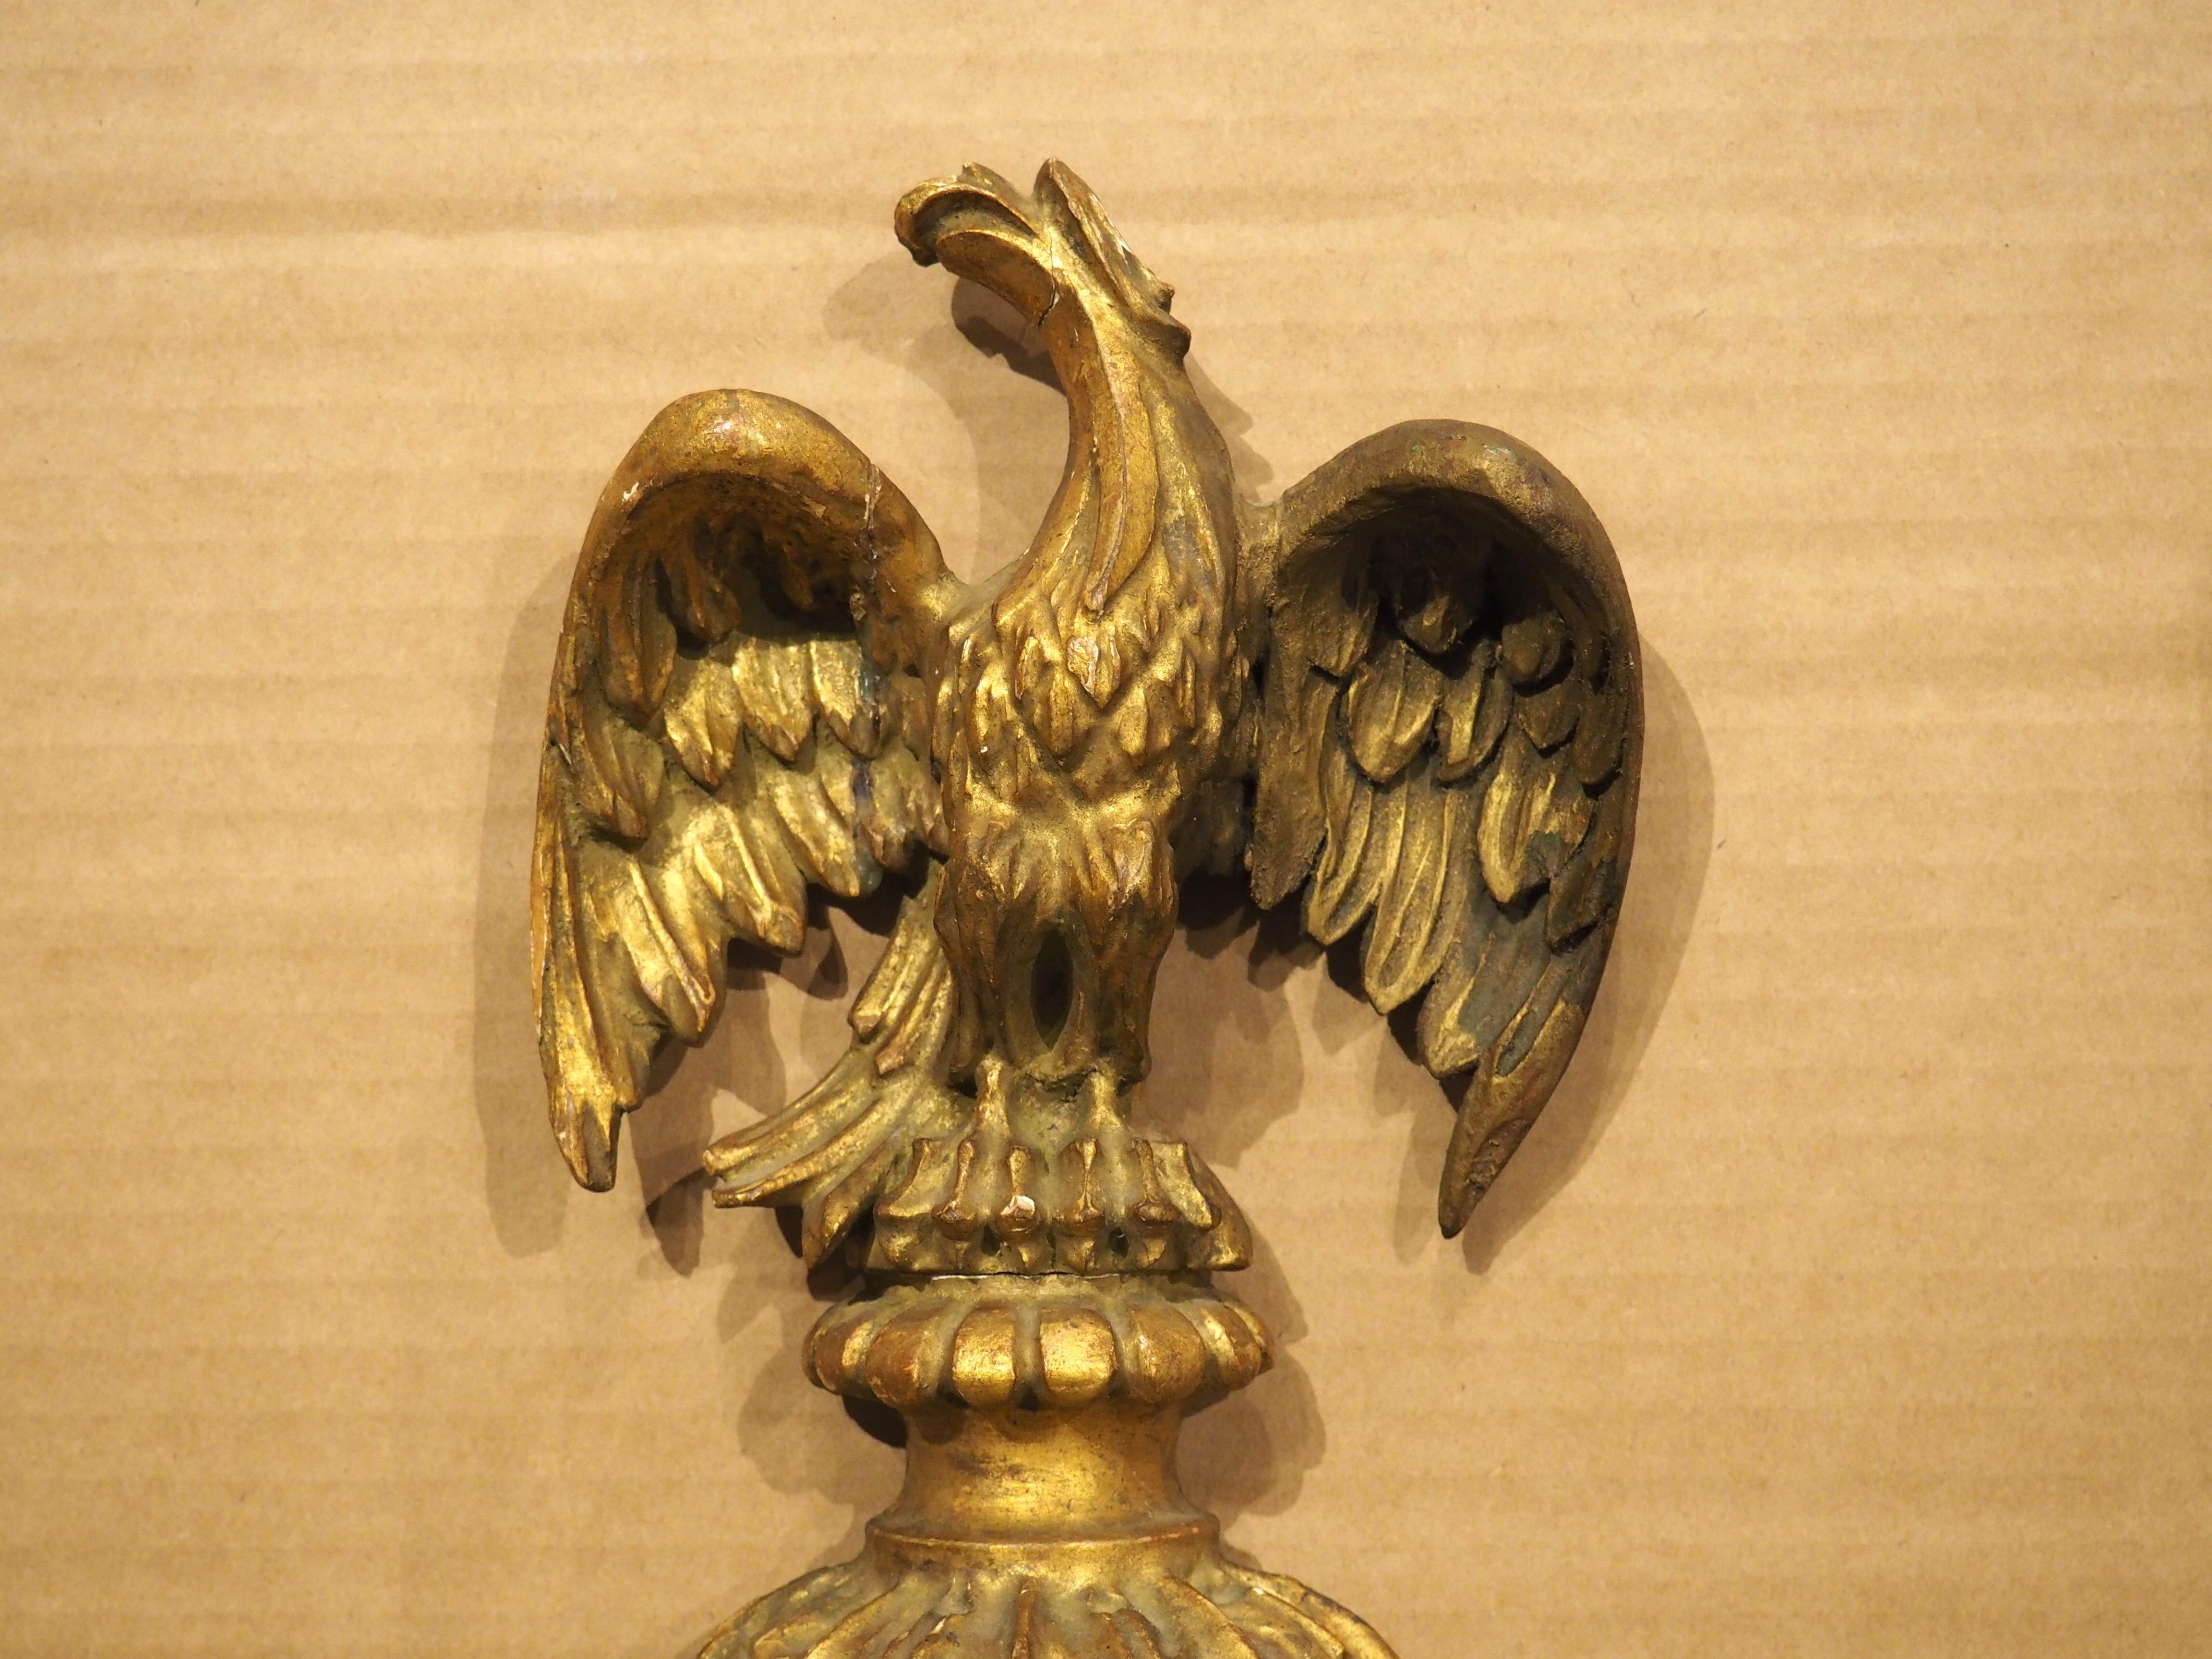 19th Century Pair of French Empire Period Giltwood Eagle Sconces, Circa 1815 For Sale